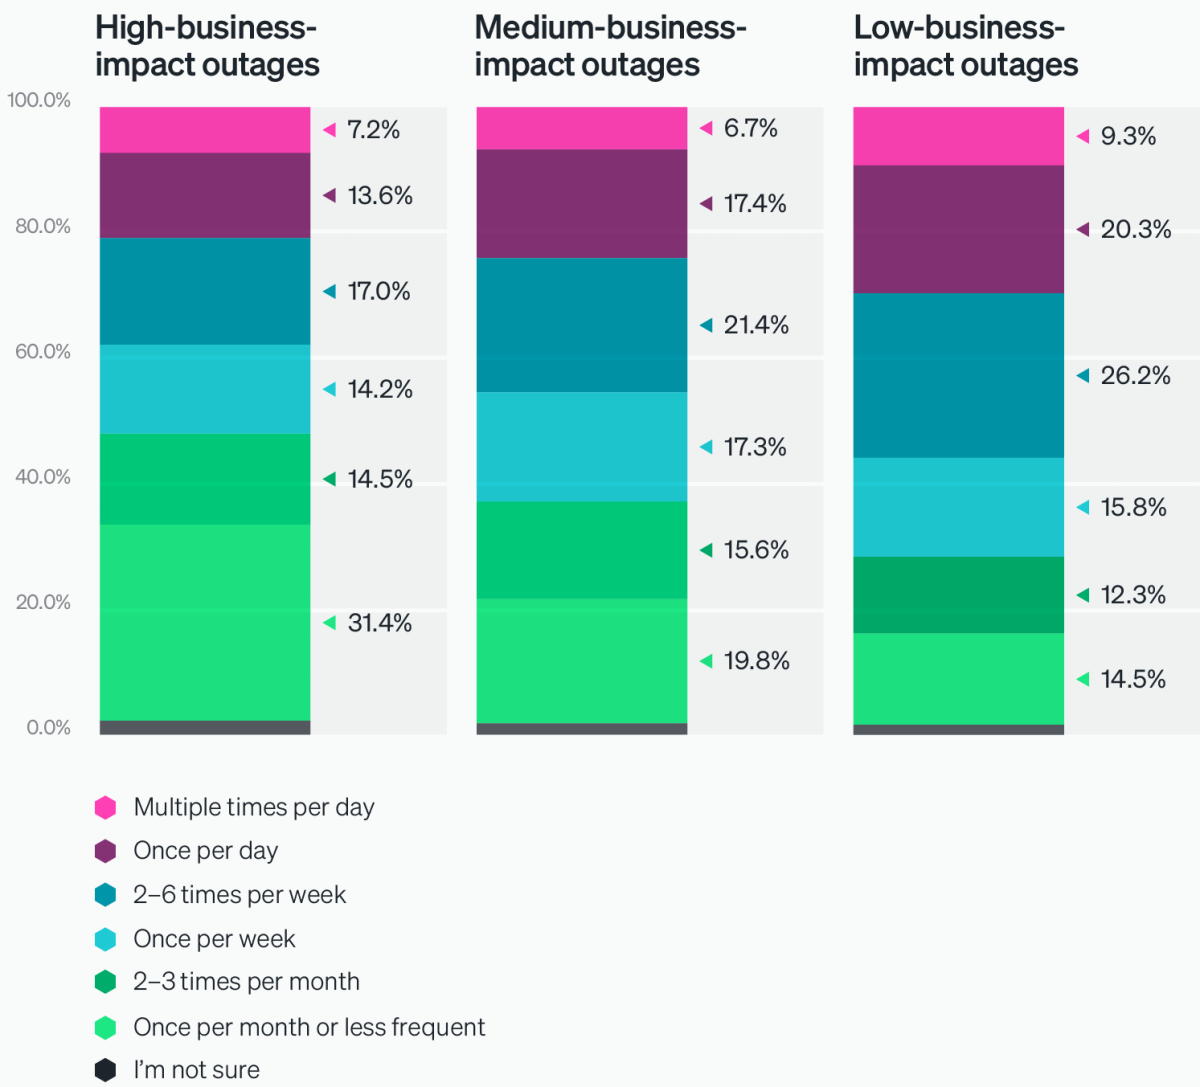 Outage frequency by high, medium, and low business impact